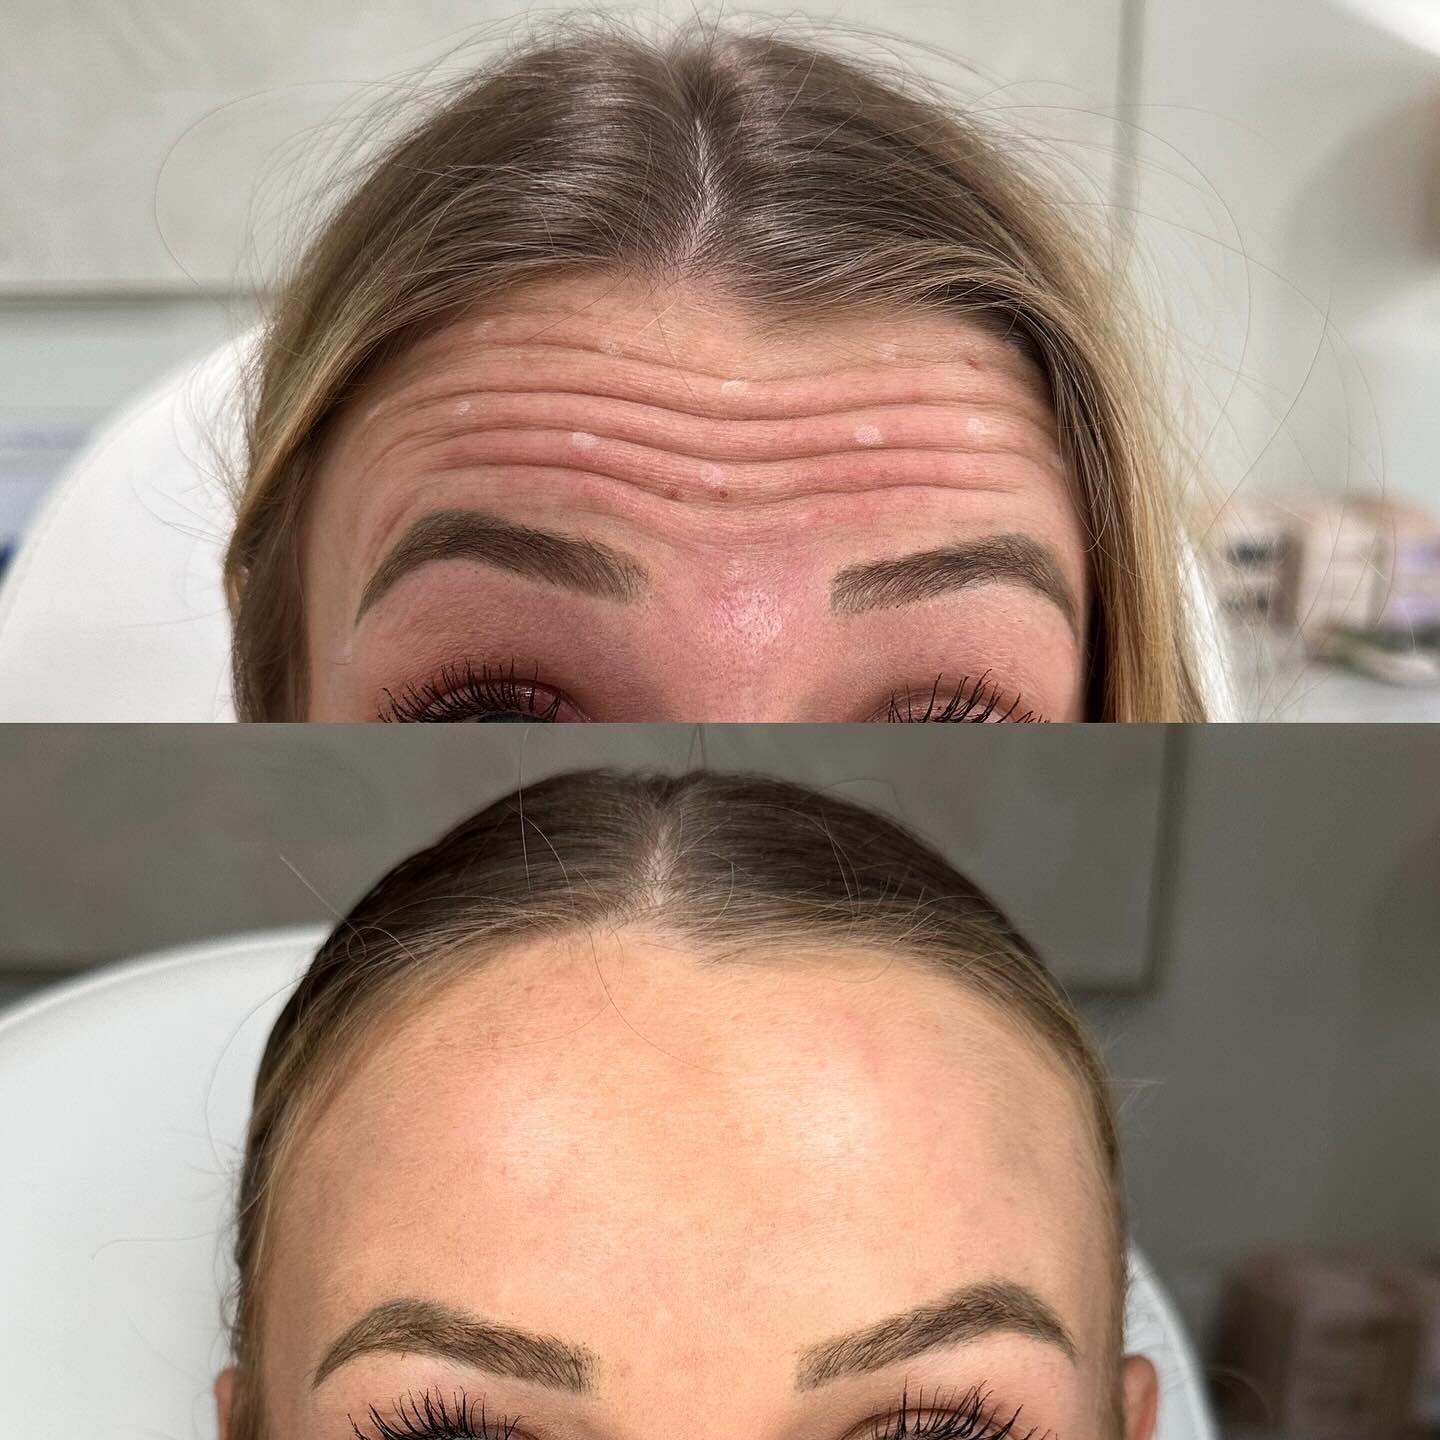 Excuse my markings in the top pics 🤪 I&rsquo;m just grateful I remembered to take the pictures! 👏 Because who doesn&rsquo;t love seeing befores and afters for Botox/Dysport?! 🔥

Top pictures are taken immediately before injections. Bottom pictures